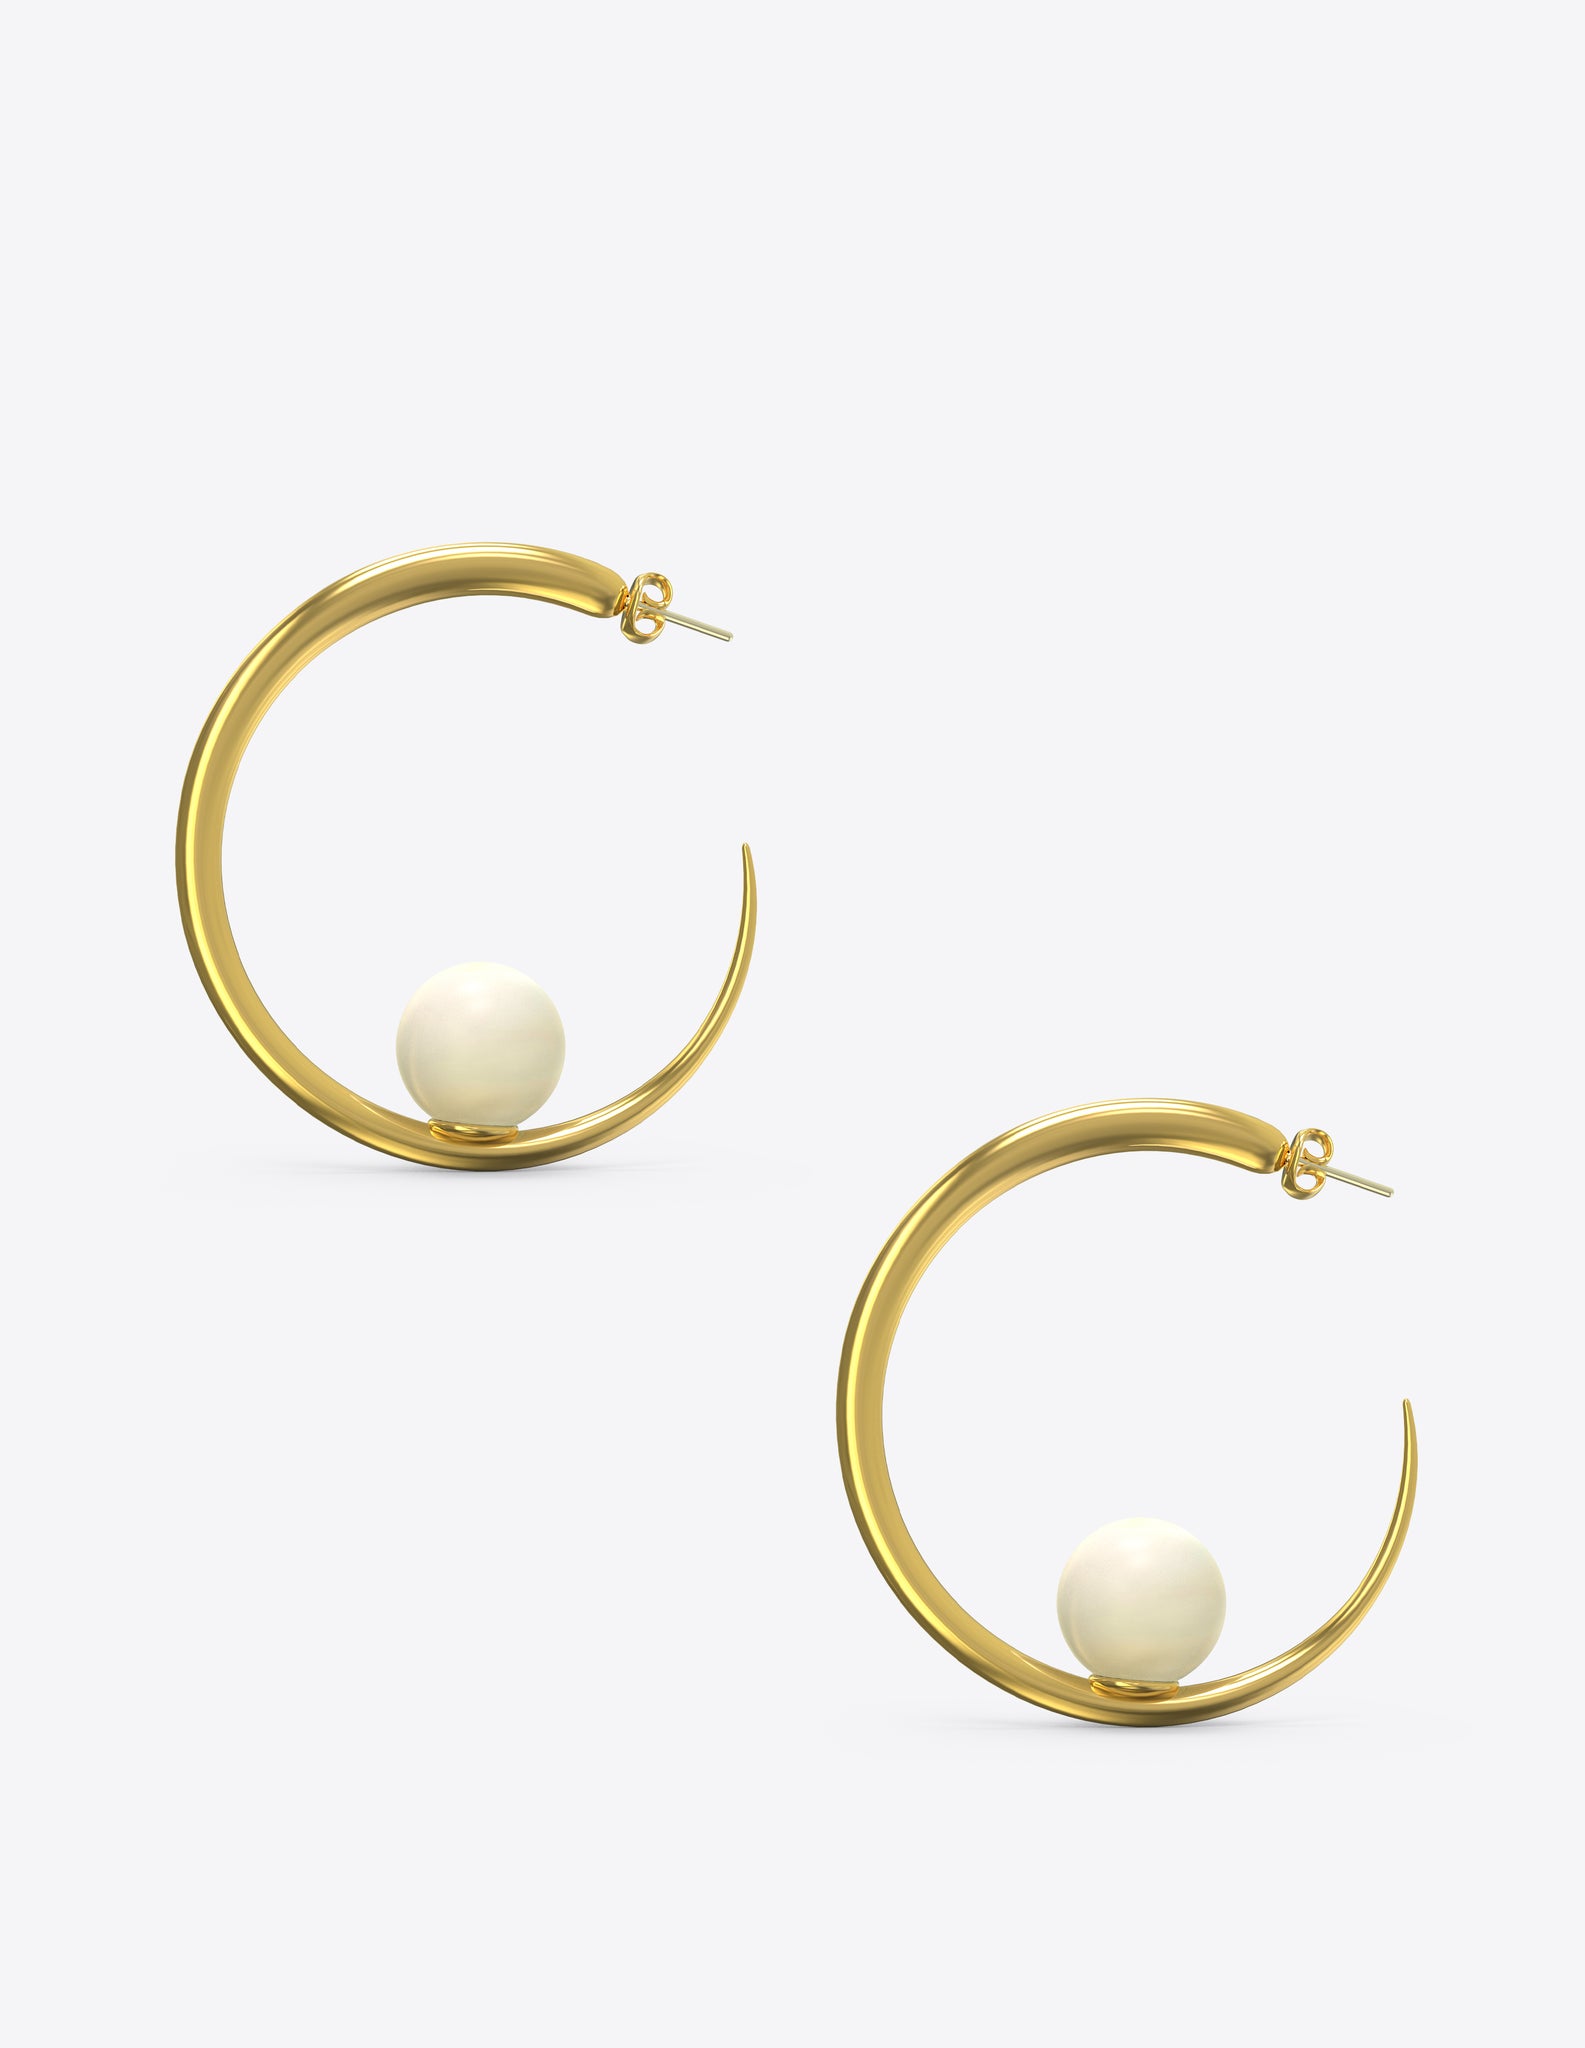 Isha Hoops in Polished Gold Vermeil with Pearl